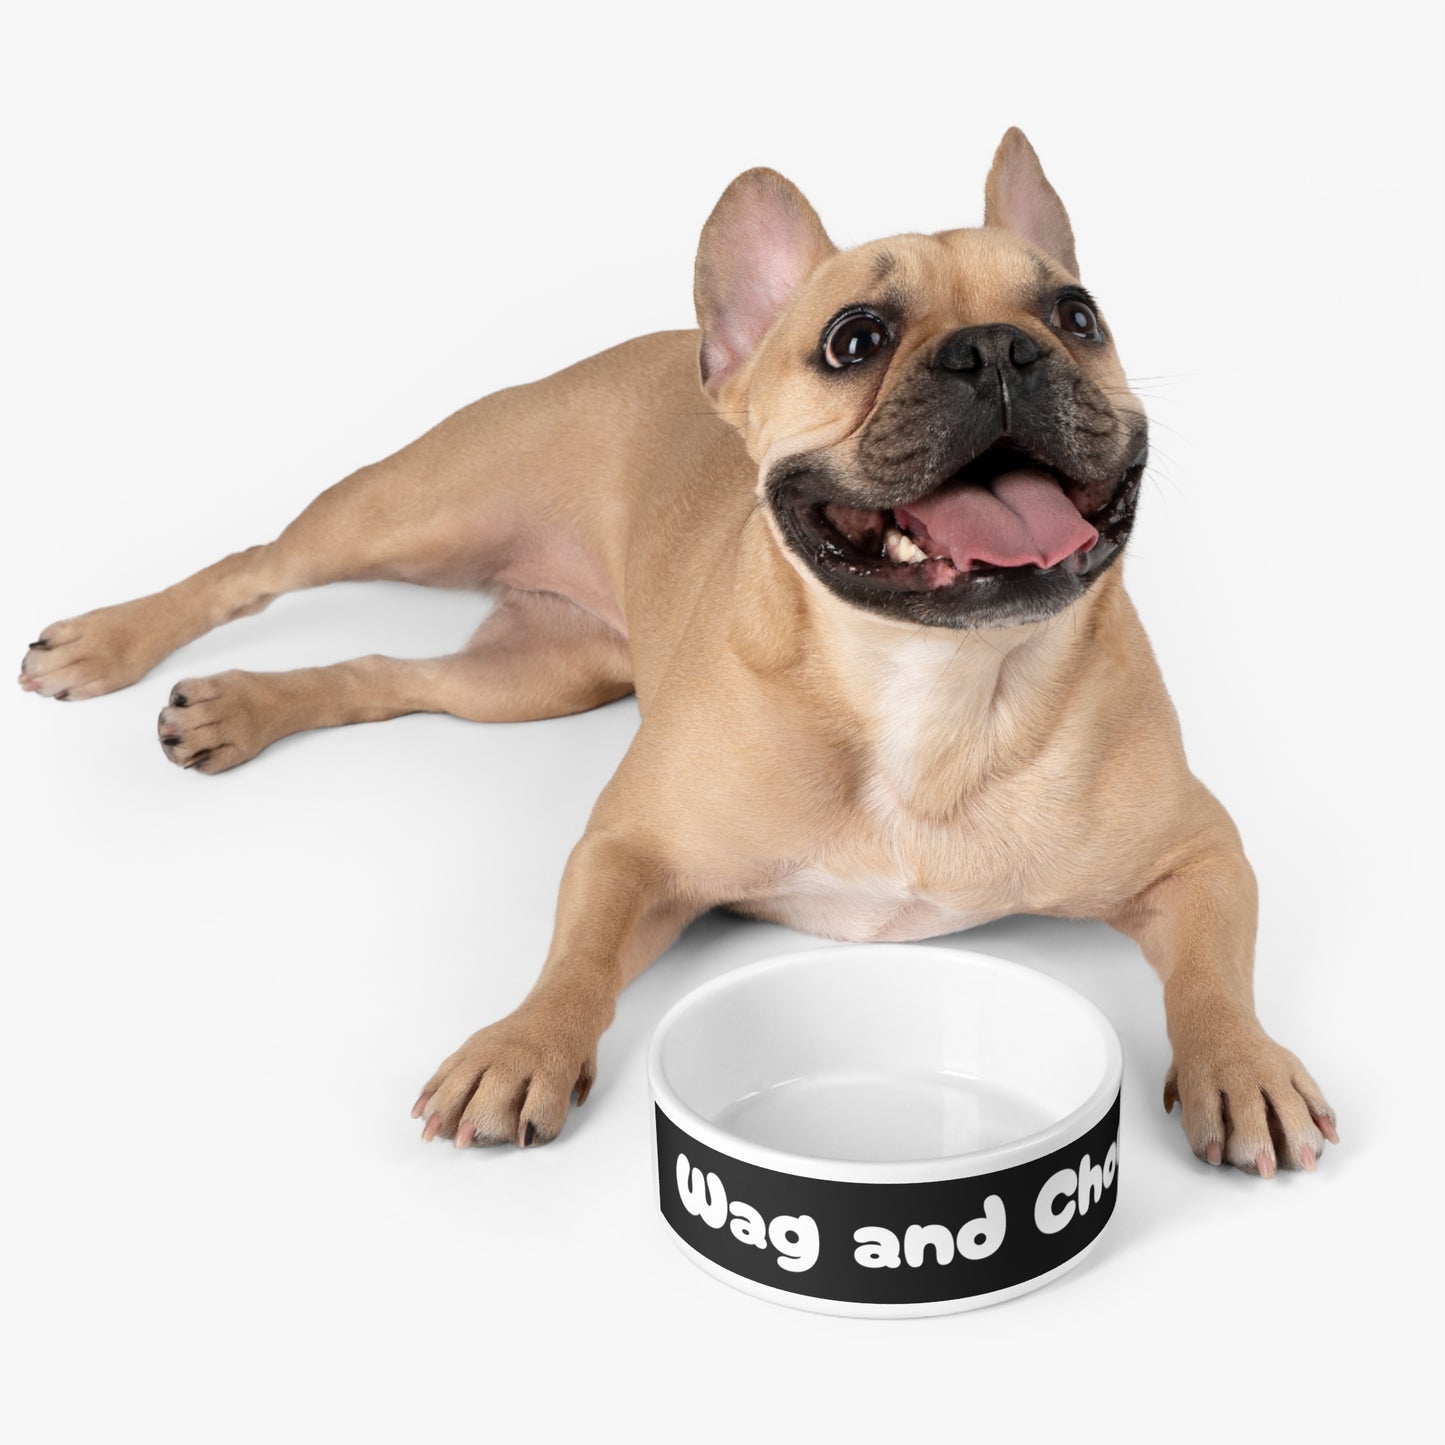 Pet Bowl Wag and Chow - Expressive DeZien 